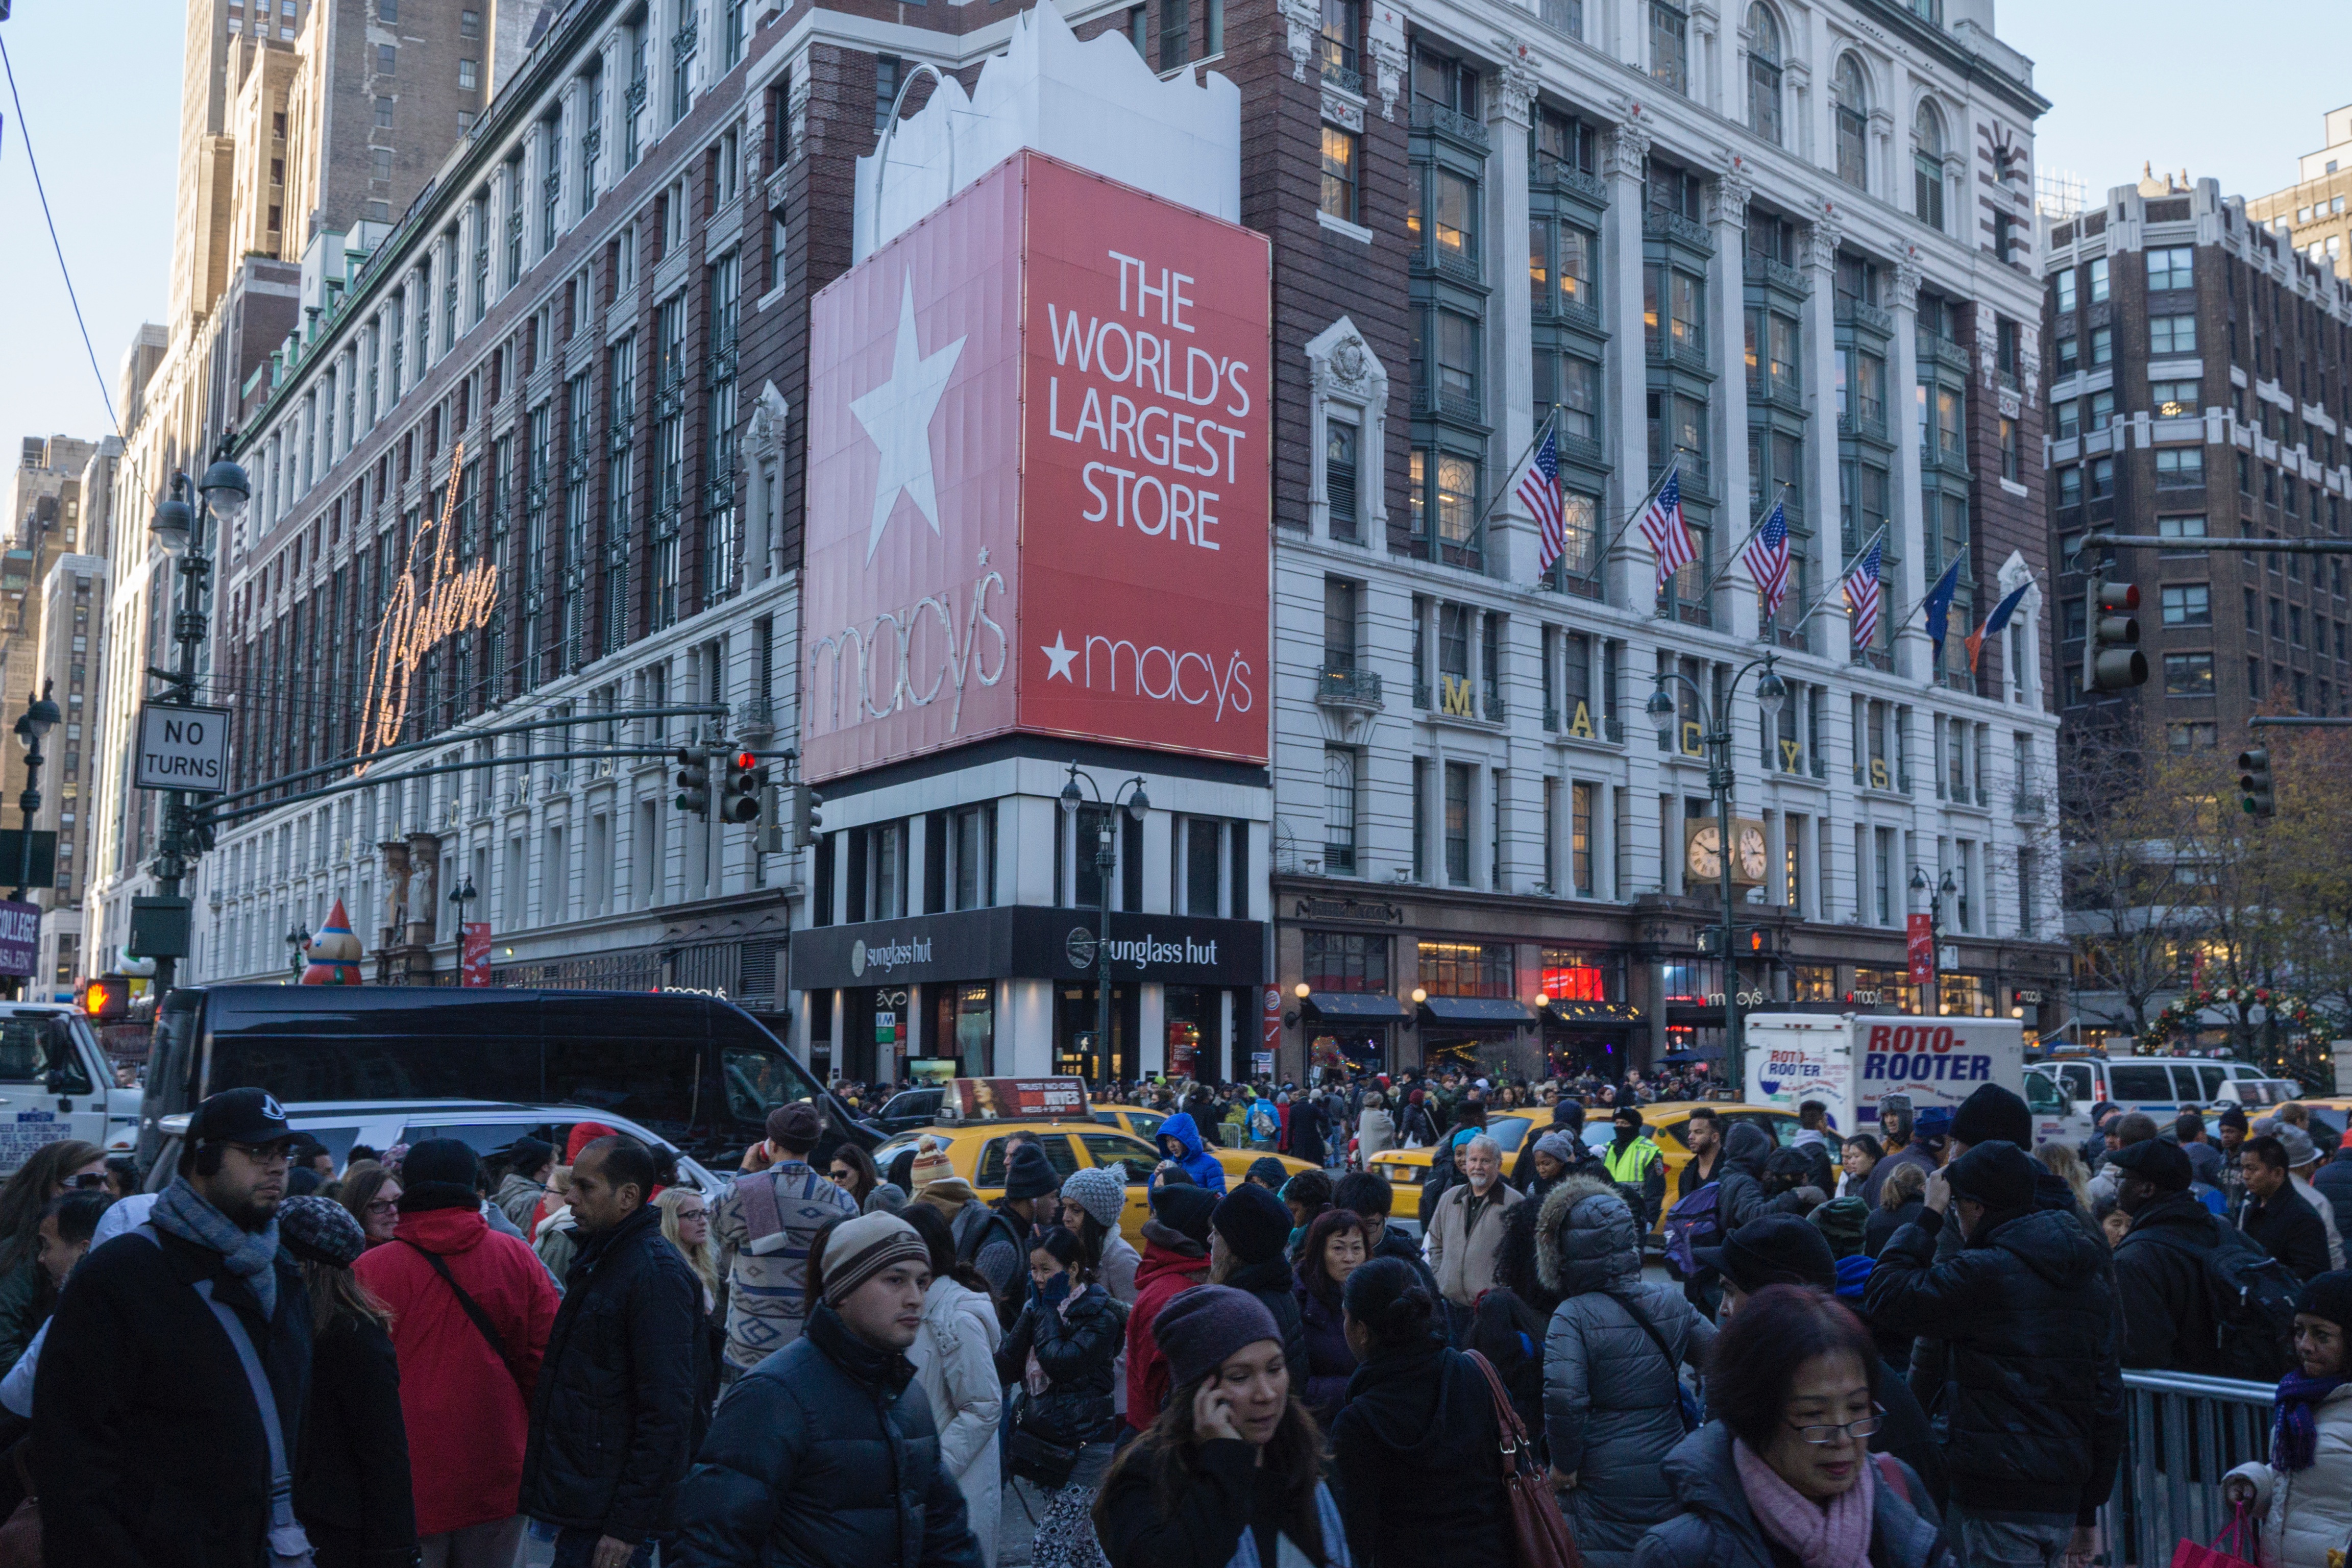 Crowds of people  Move past Macy's during Black Friday super sale shoppers in New York, New York, USA. (Zoran Milich&mdash;Getty Images)